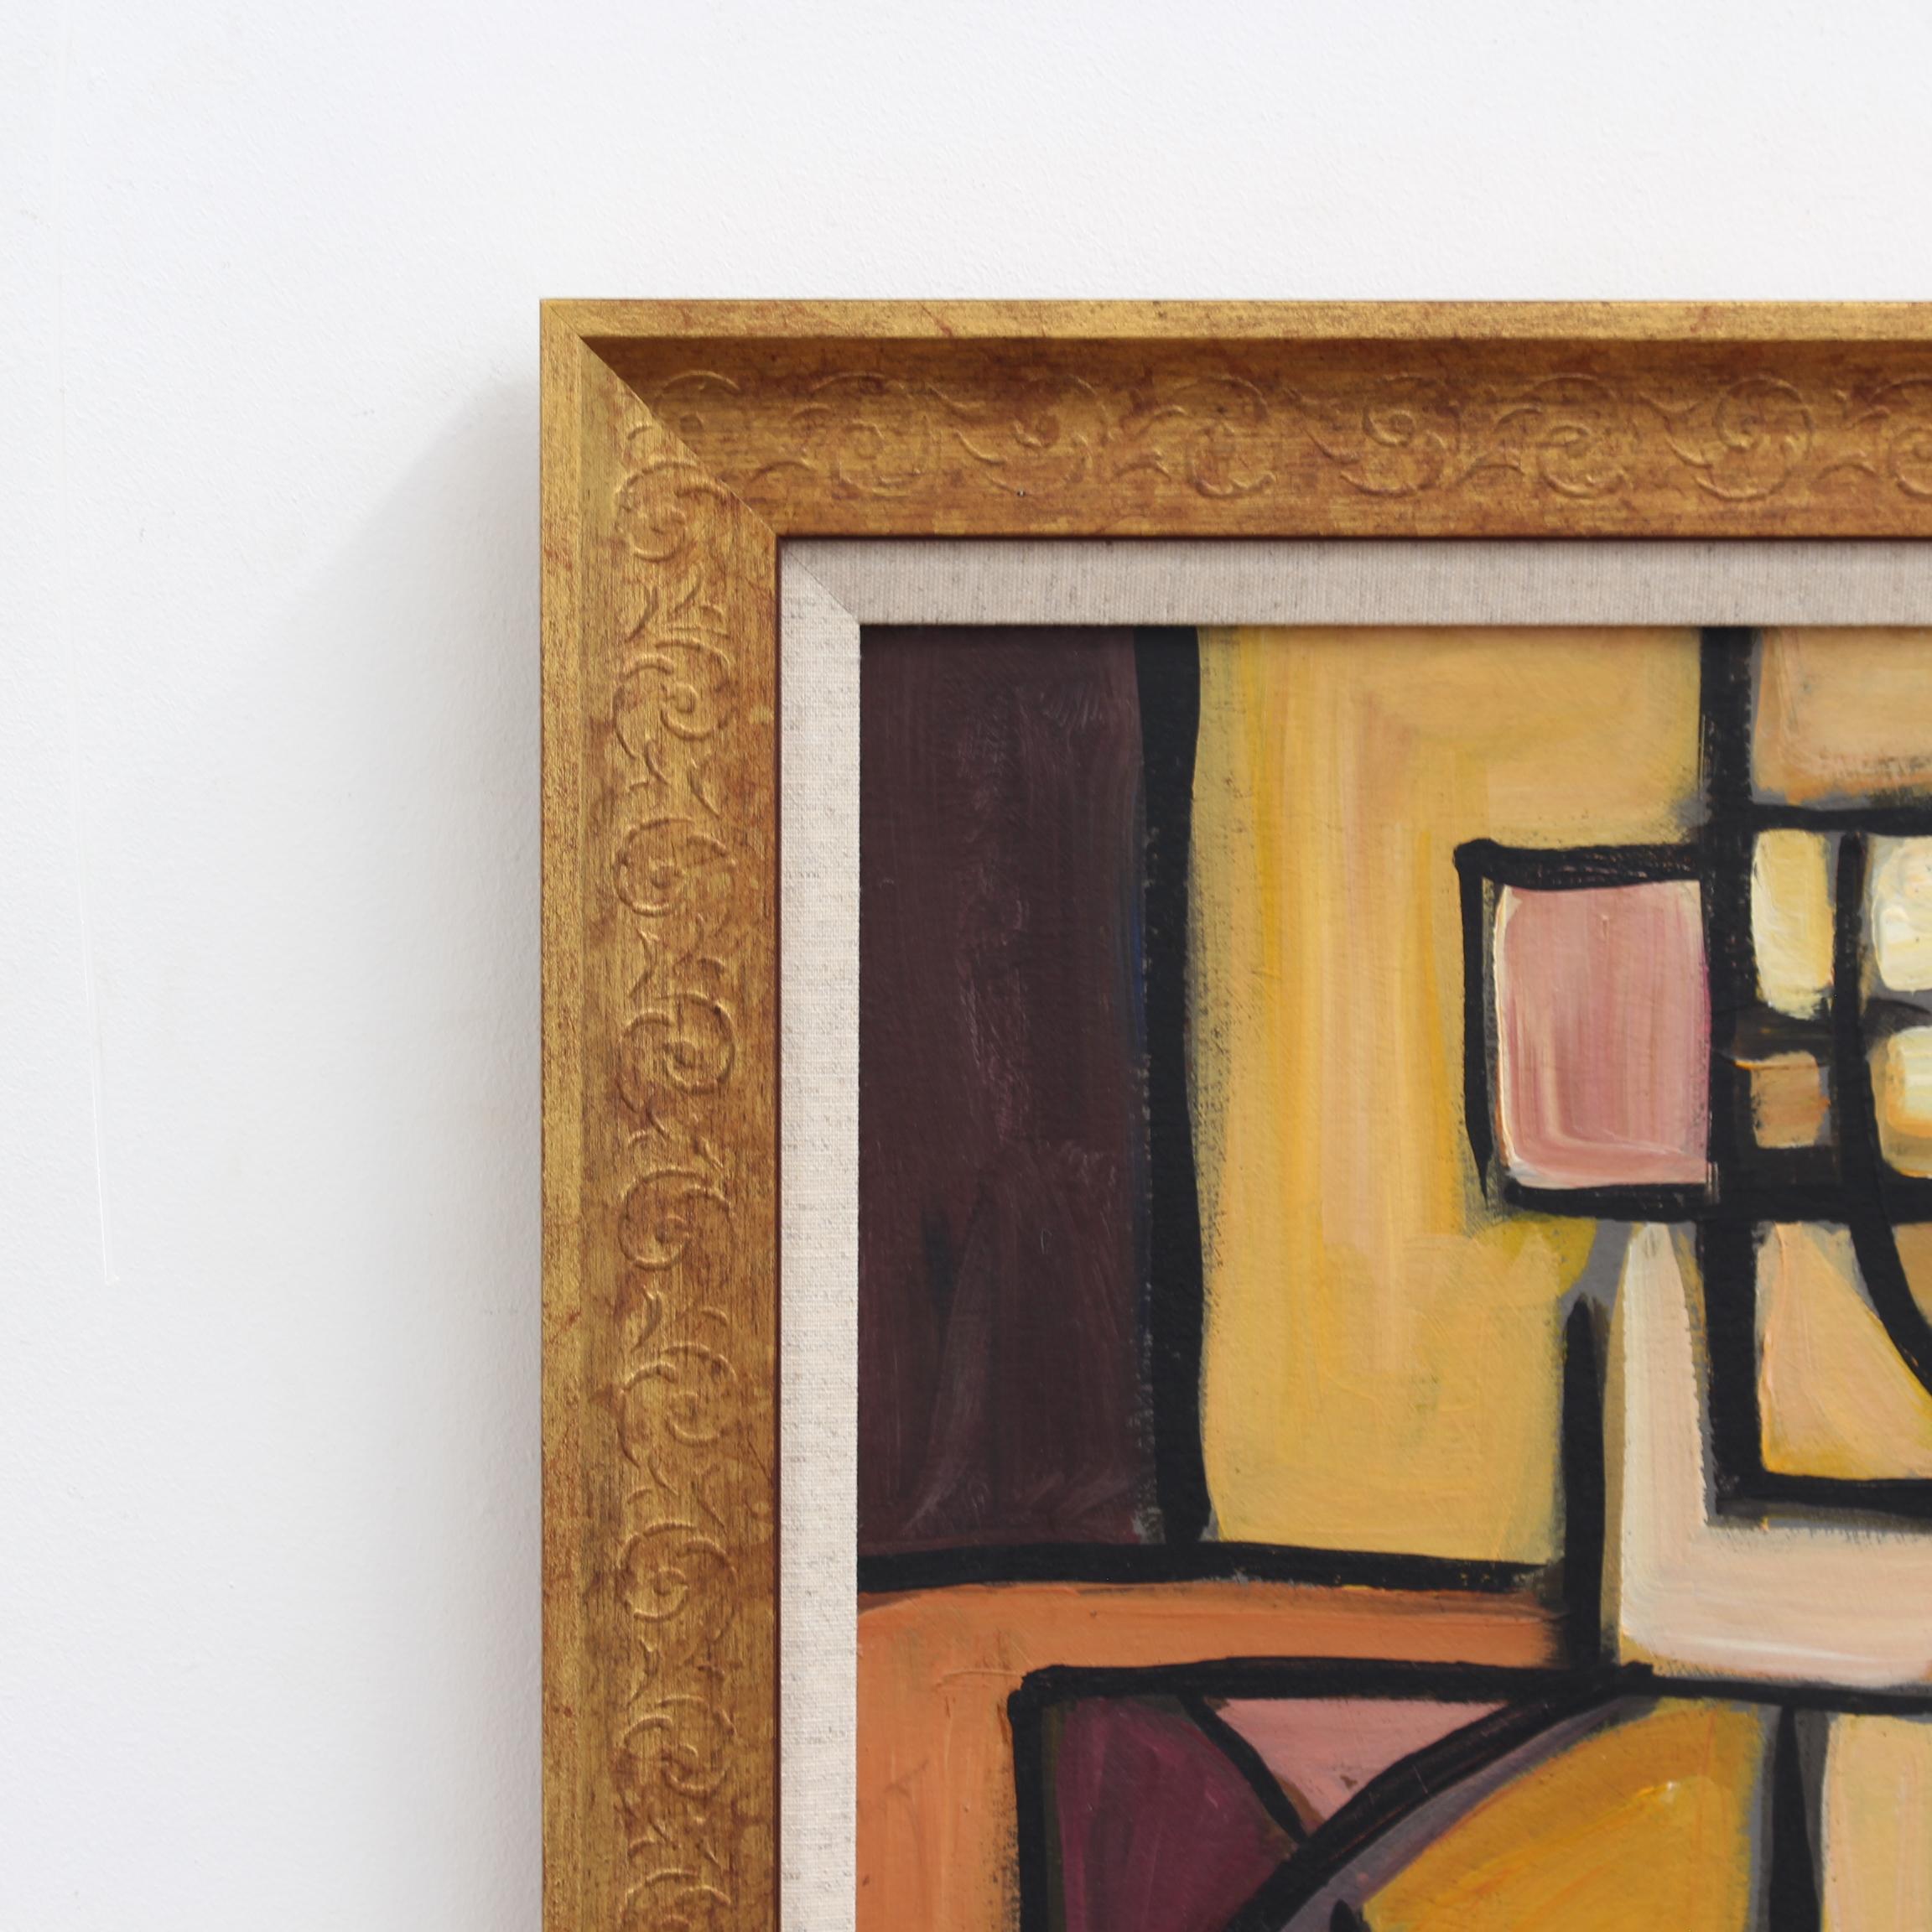 'Cubist Figure', oil on board, by STM (circa 1960s - 70s). A marvellous mid-century sizeable painting by an artist with the initials STM. Clearly inspired by cubists Picasso and Braque, the artist uses angles, lines and subdued earth tones to create